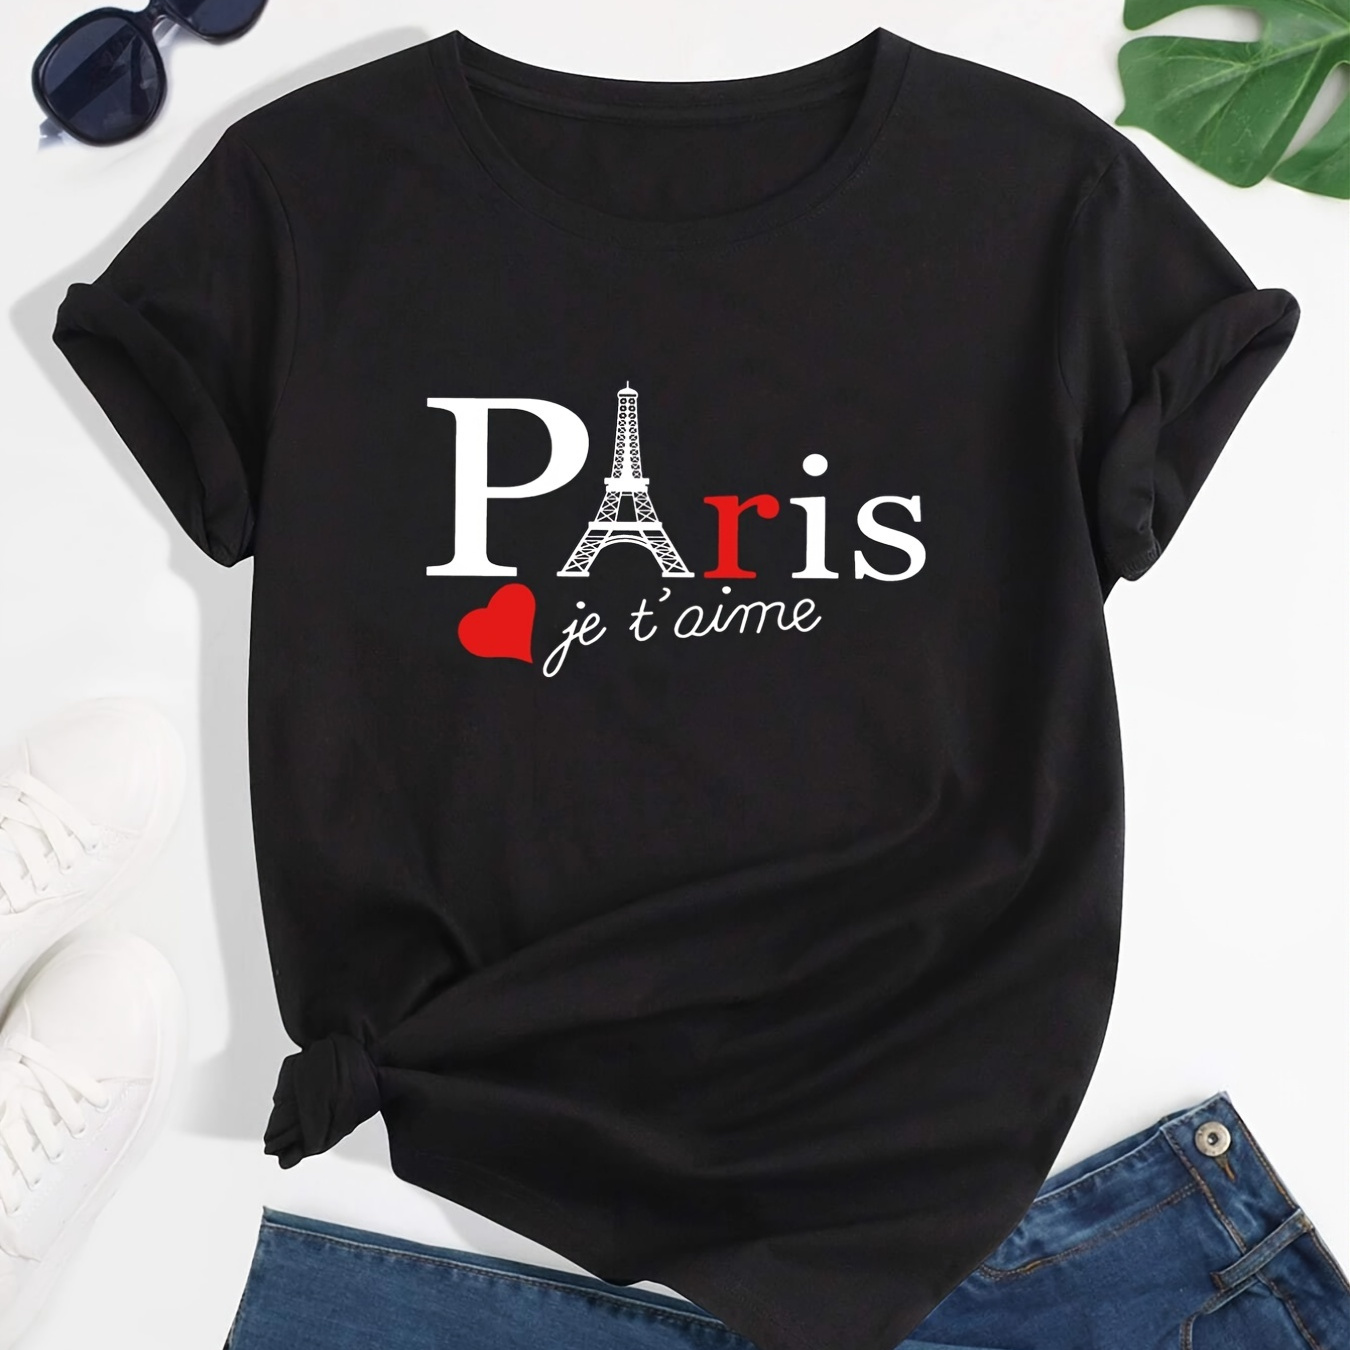 

Paris Letter Print Crew Neck T-shirt, Casual Short Sleeve T-shirt, Casual Every Day Tops, Women's Clothing